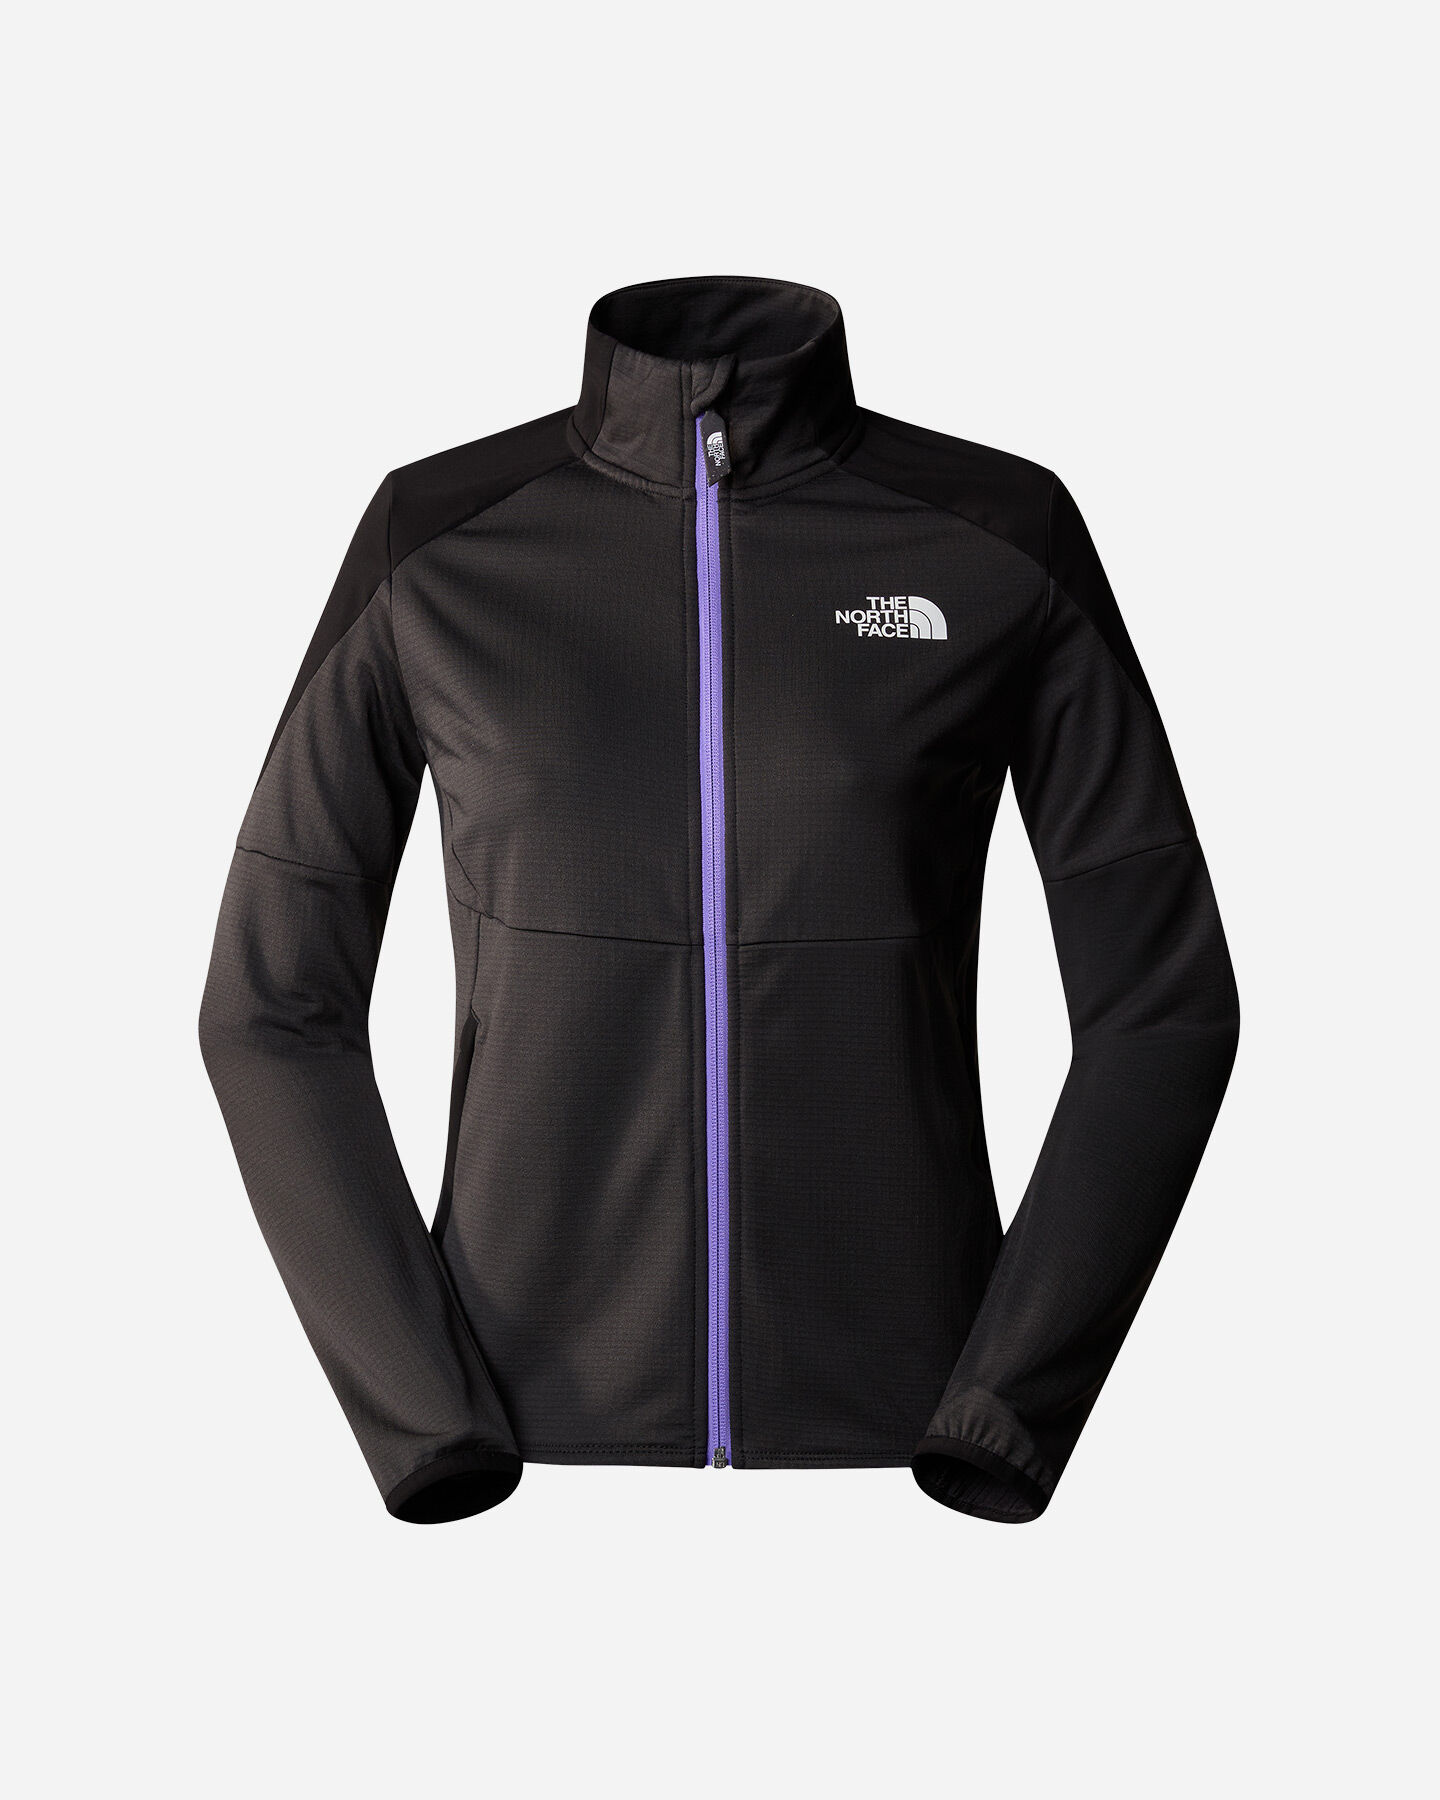  Pile THE NORTH FACE MIDDLE ROCK W S5650187|MN8|S scatto 0